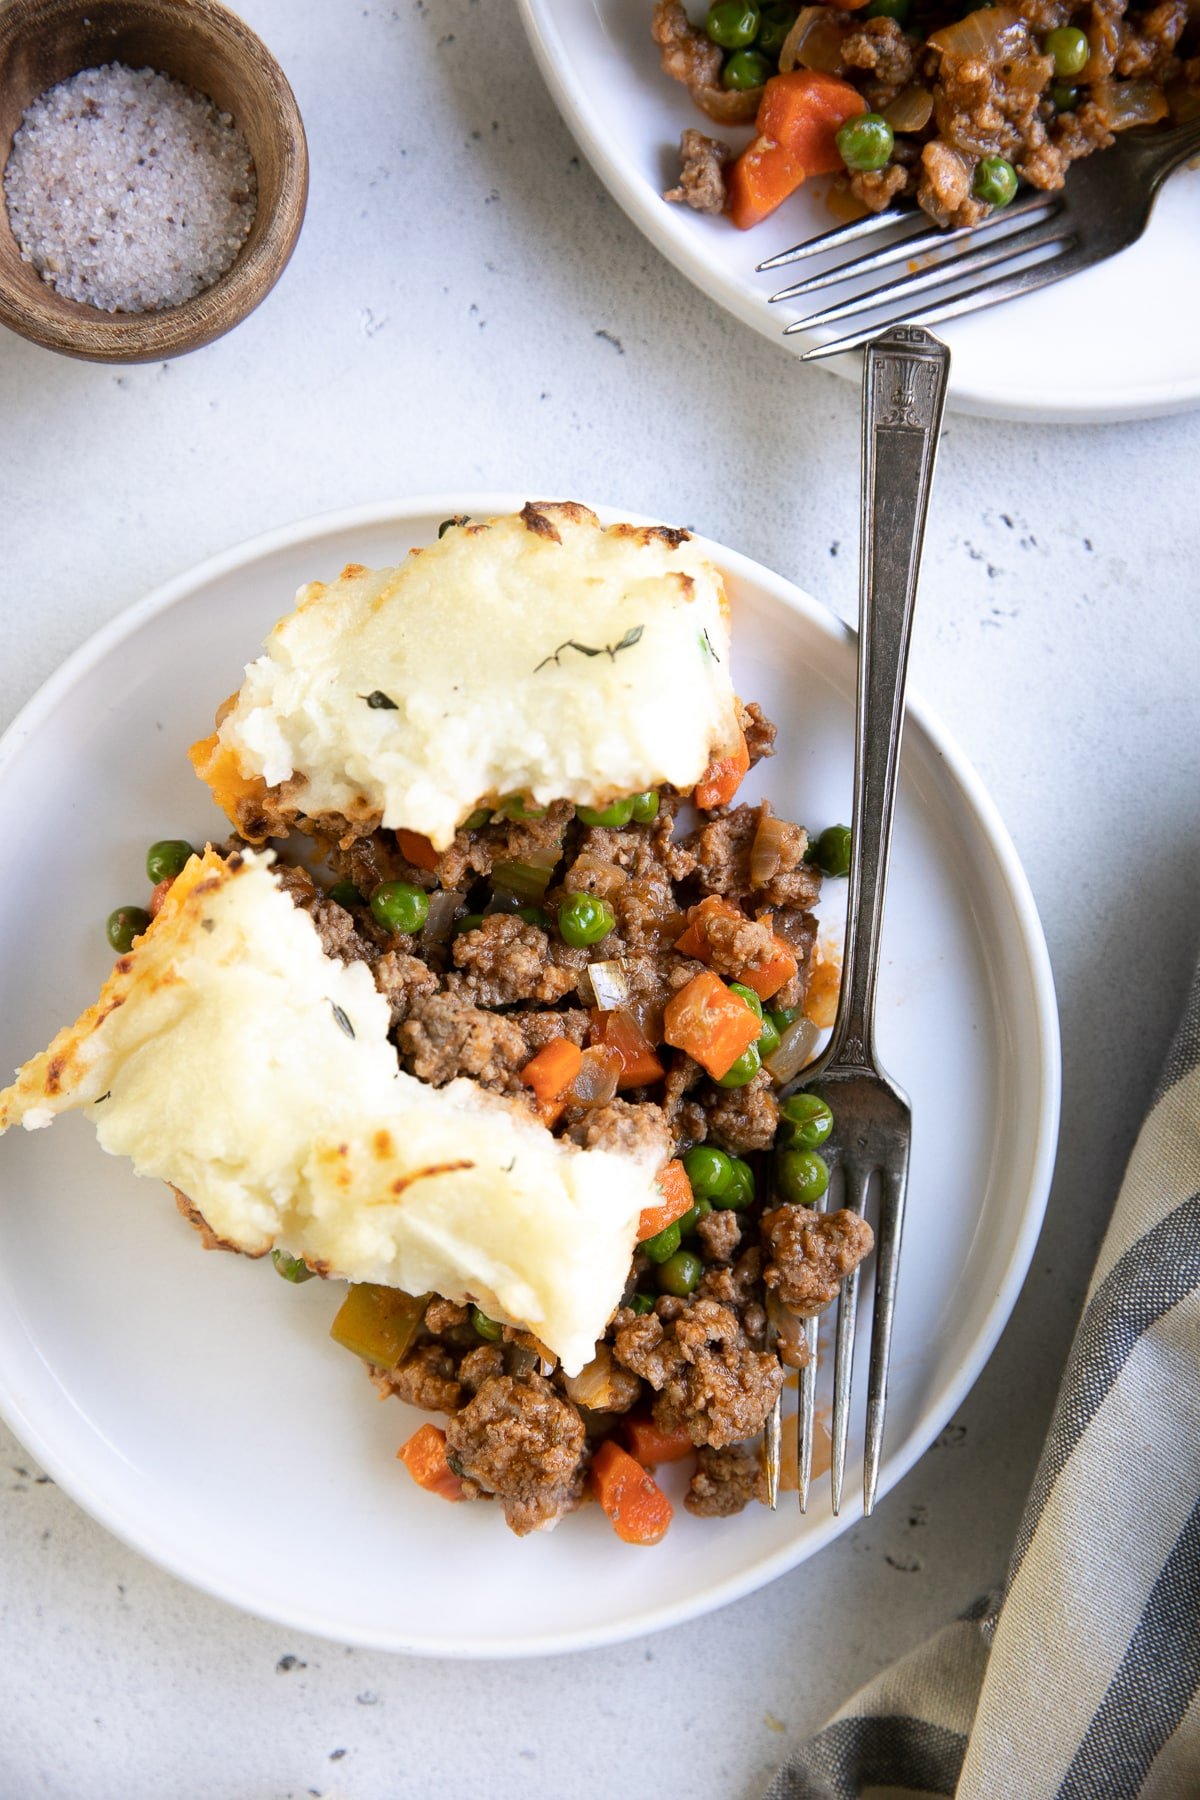 Big slice of homemade classic shepherd's pie on a white serving plate.